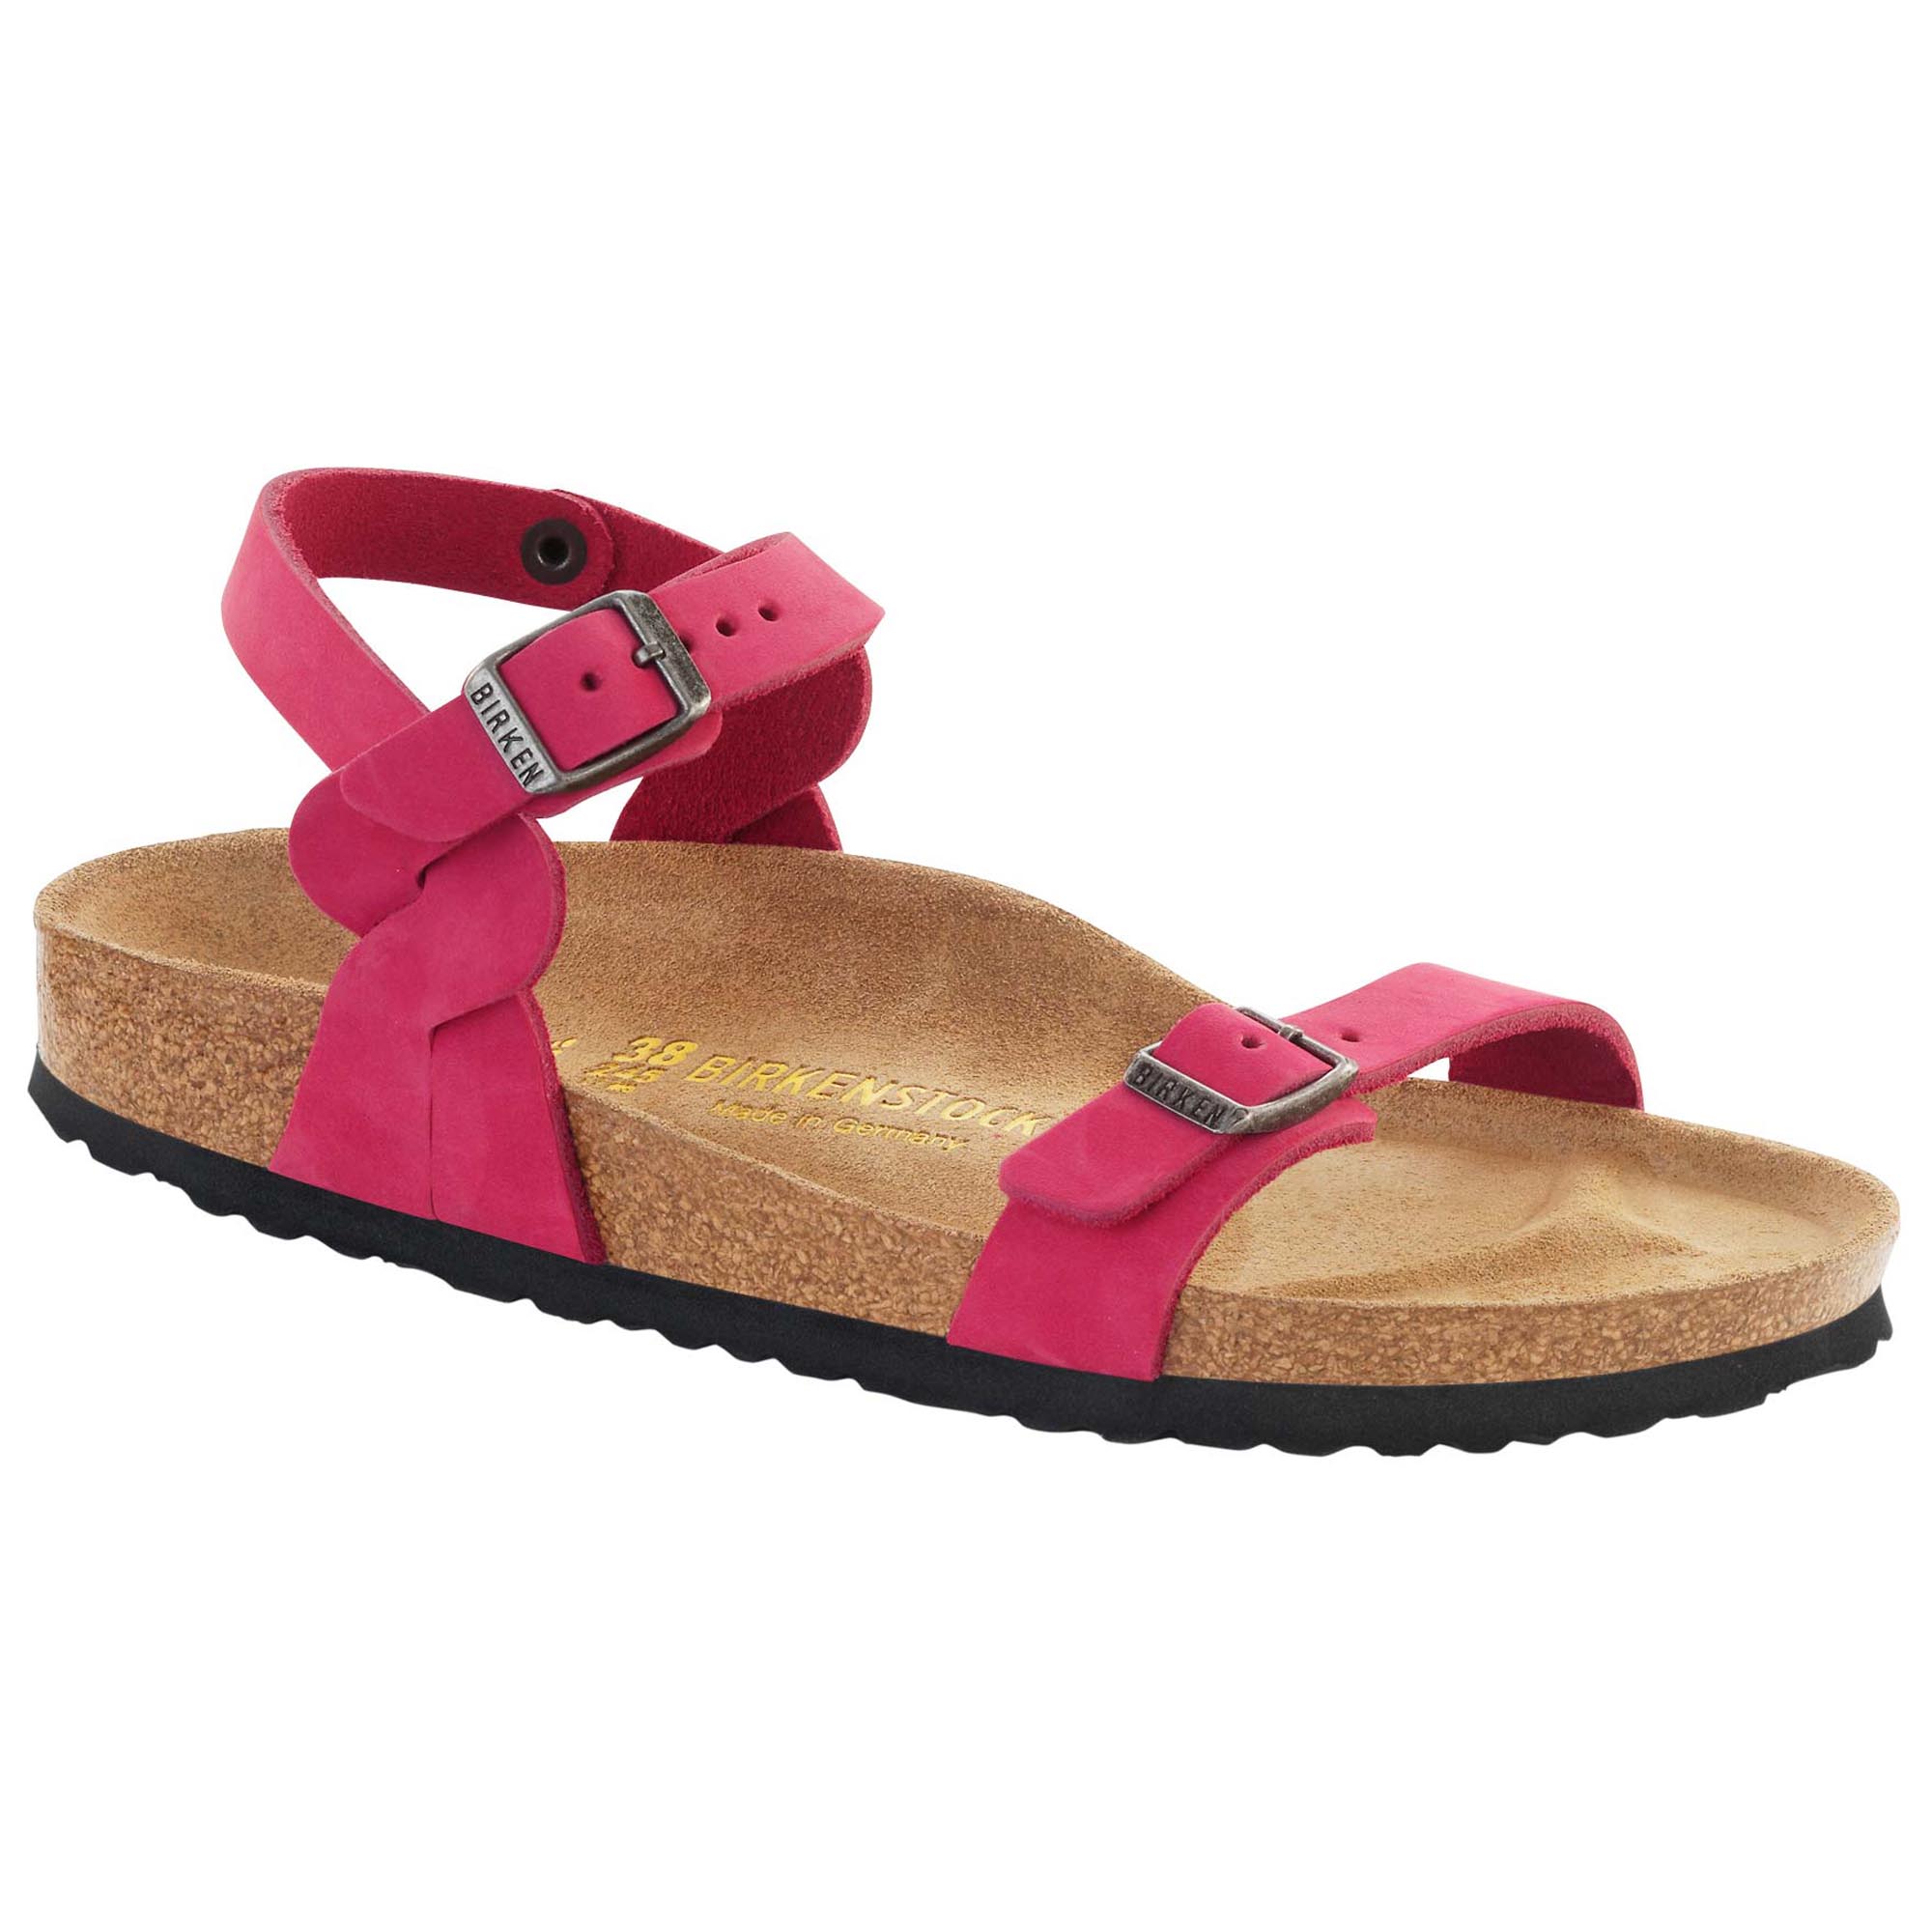 pavers strappy sandals